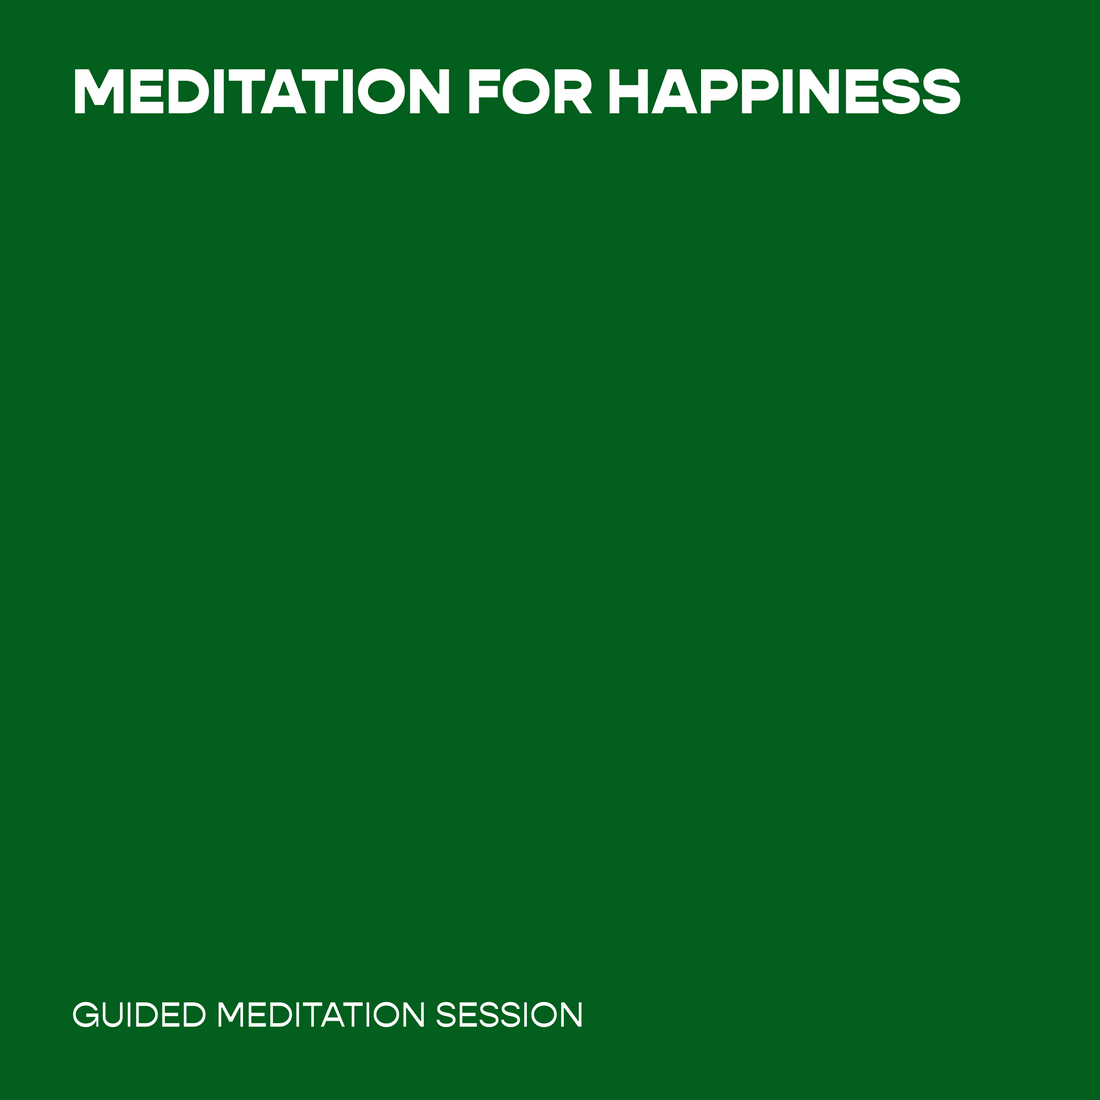 Meditation for Happiness